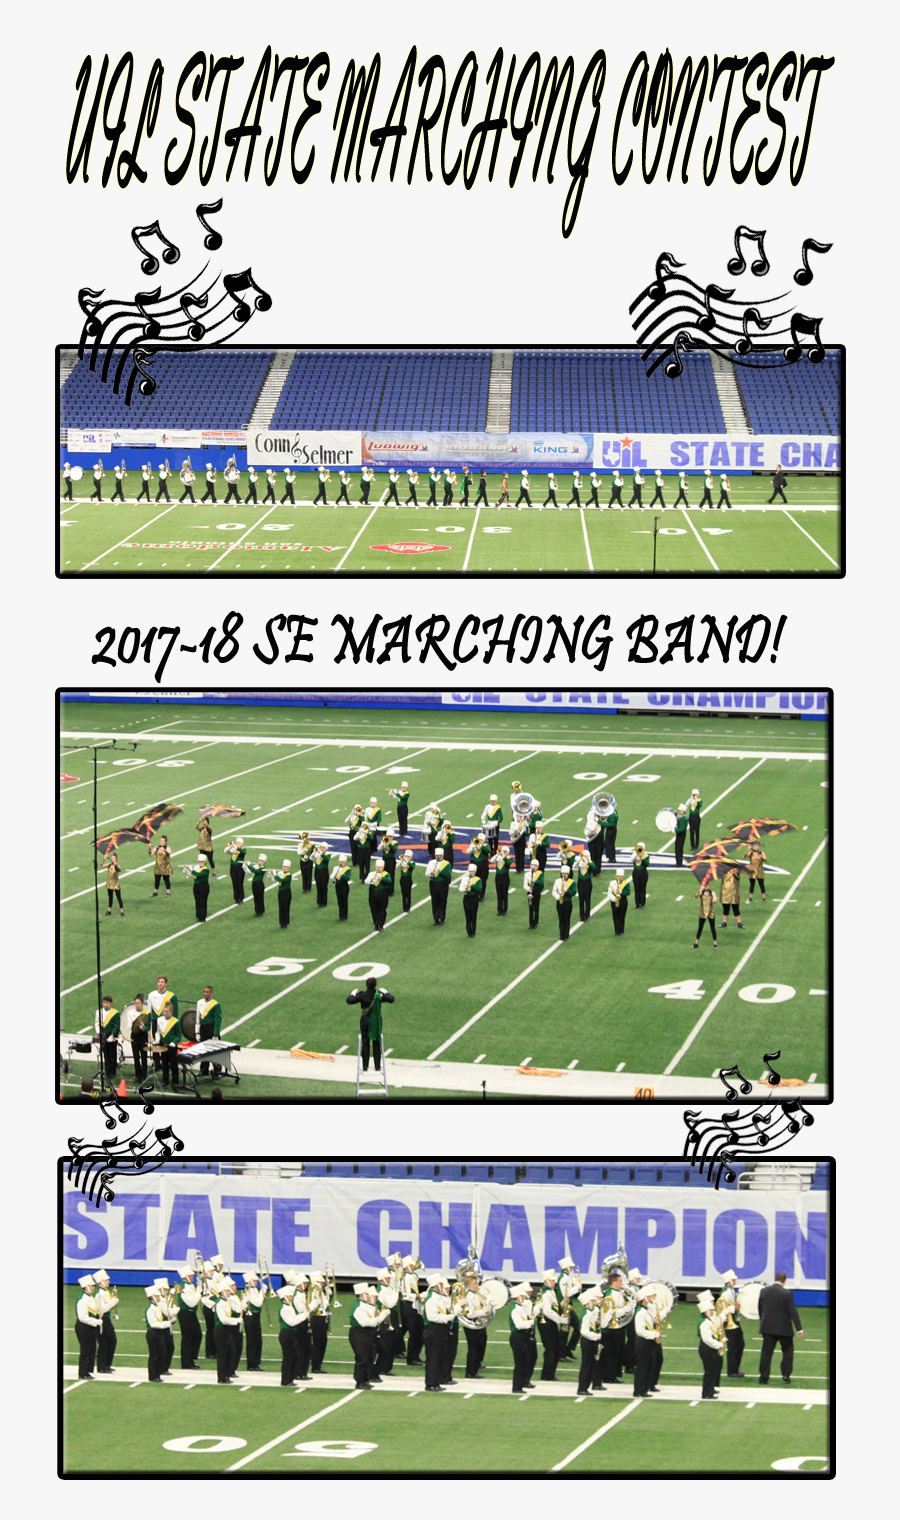 Springlake-earth High School - Marching Band, Transparent Clipart